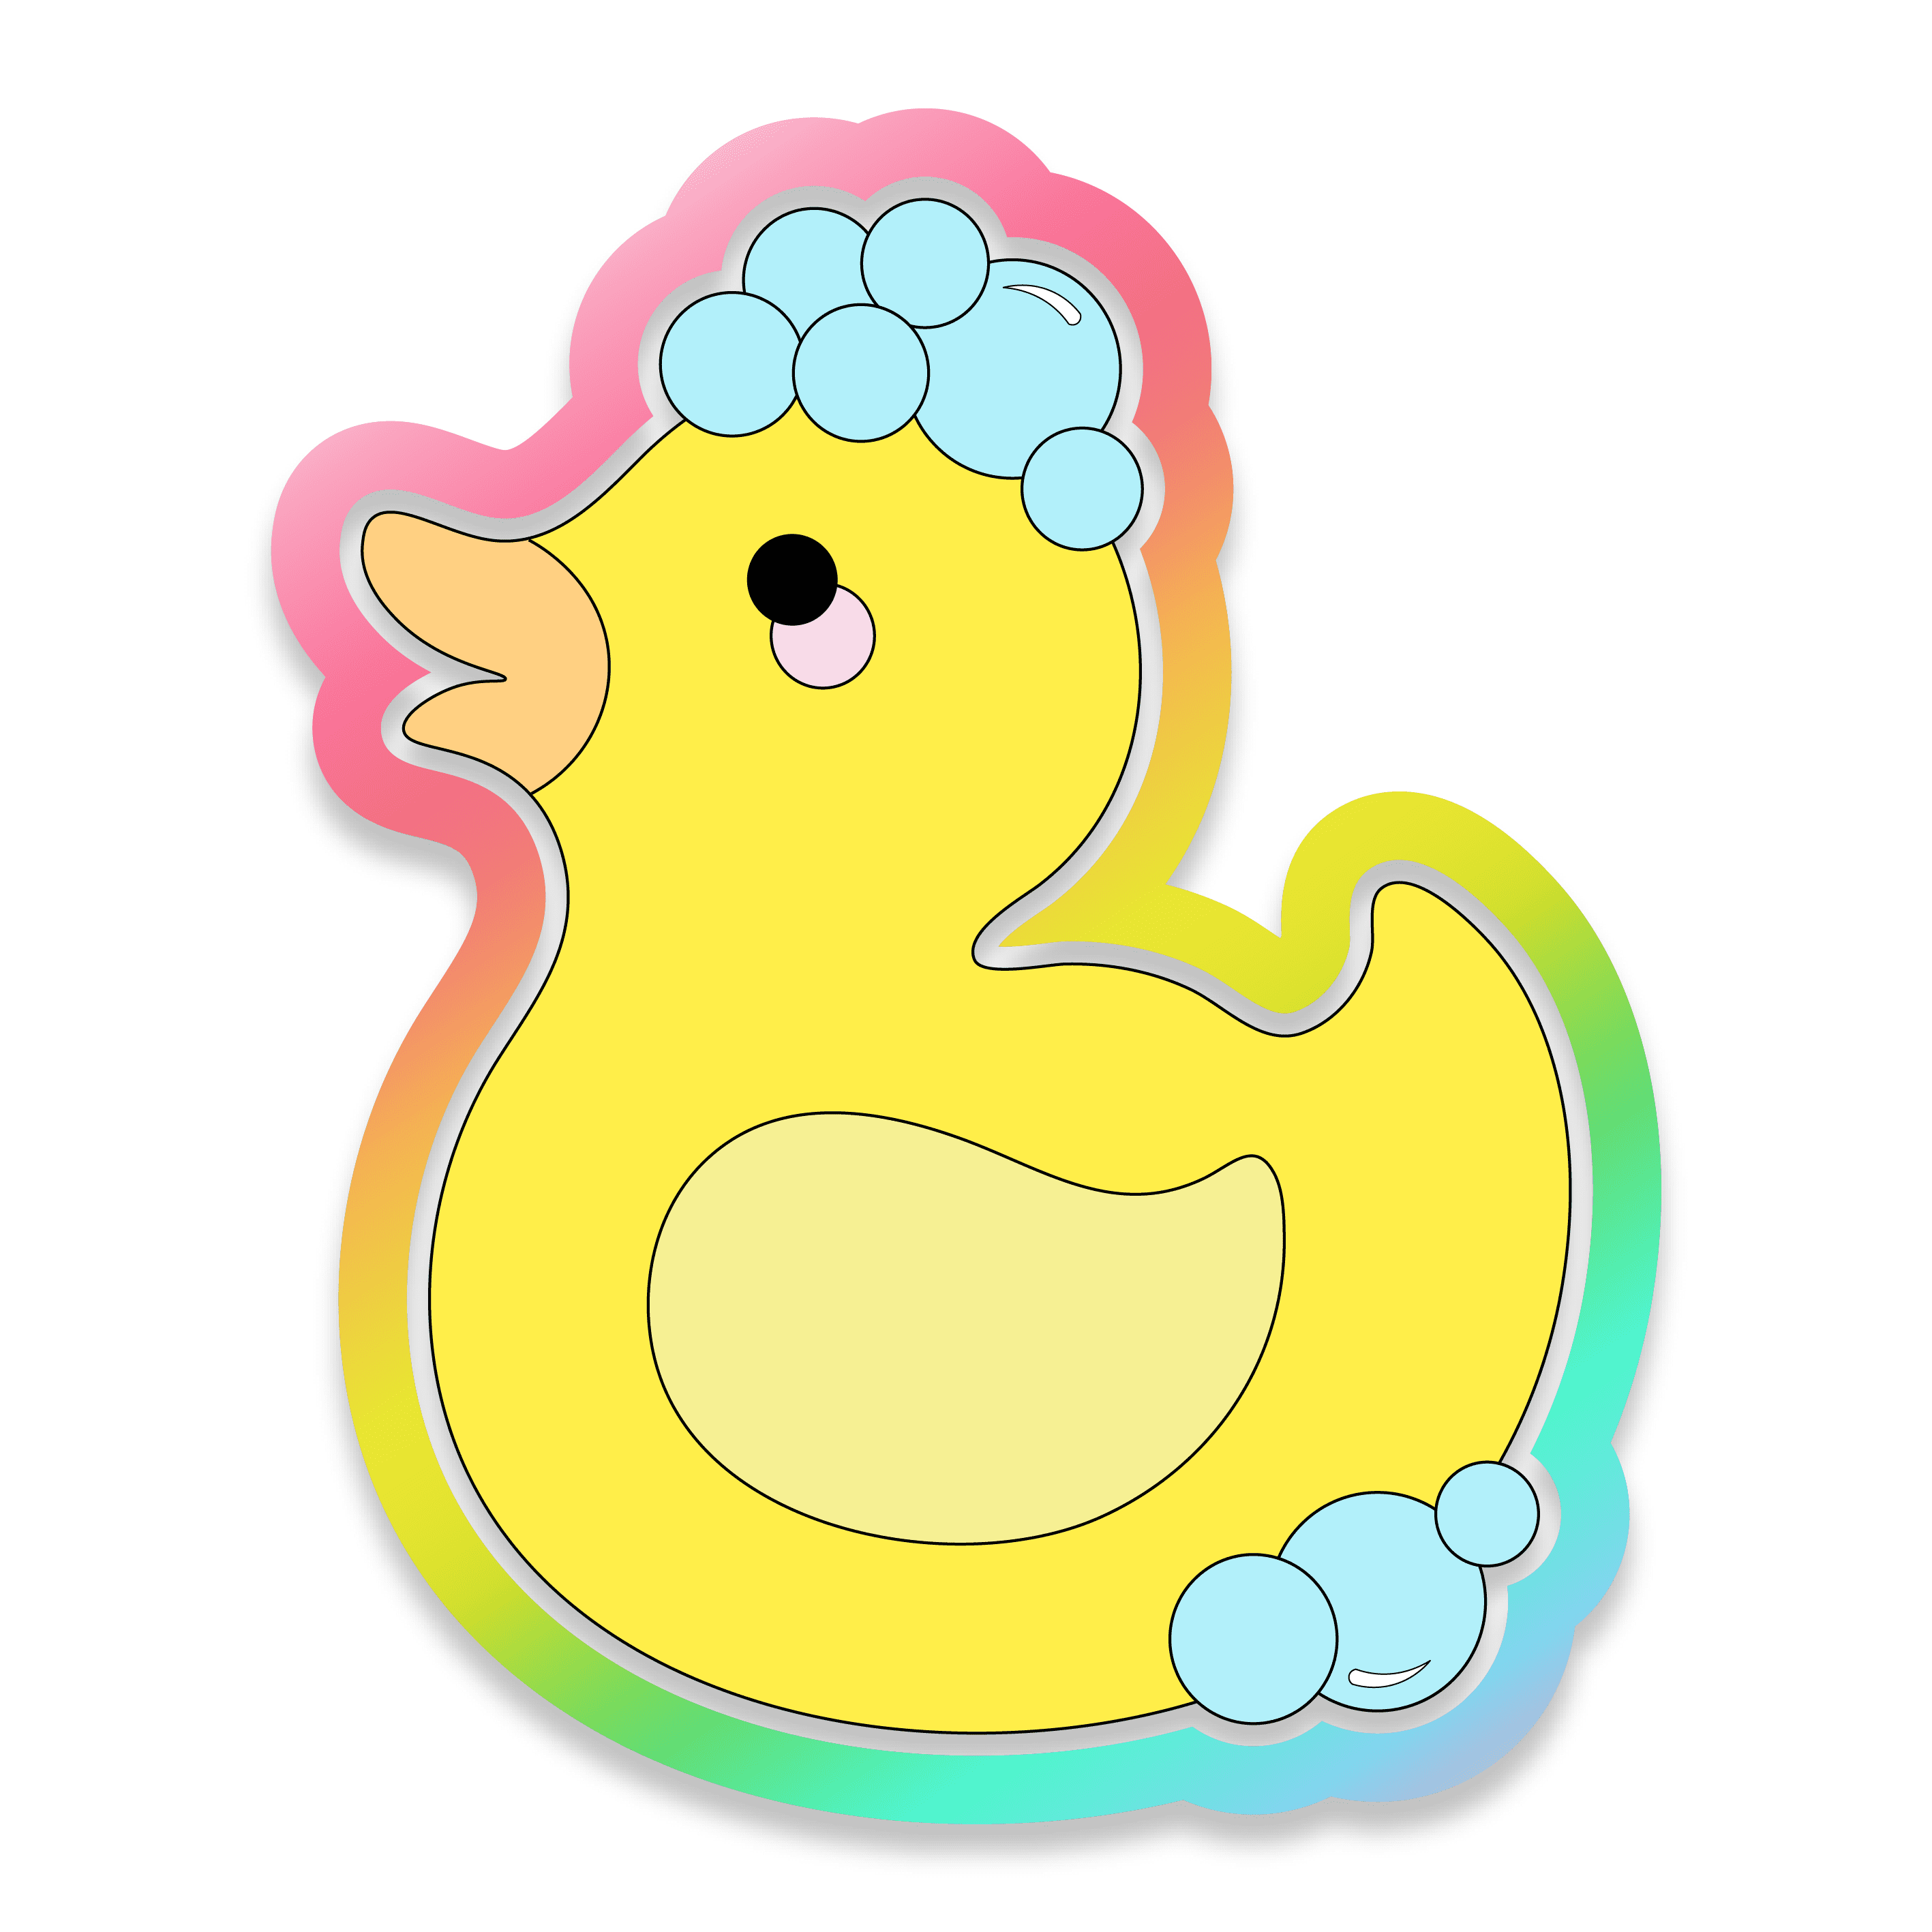 Digital image of yellow rubber ducky with bubbles cookie cutter.